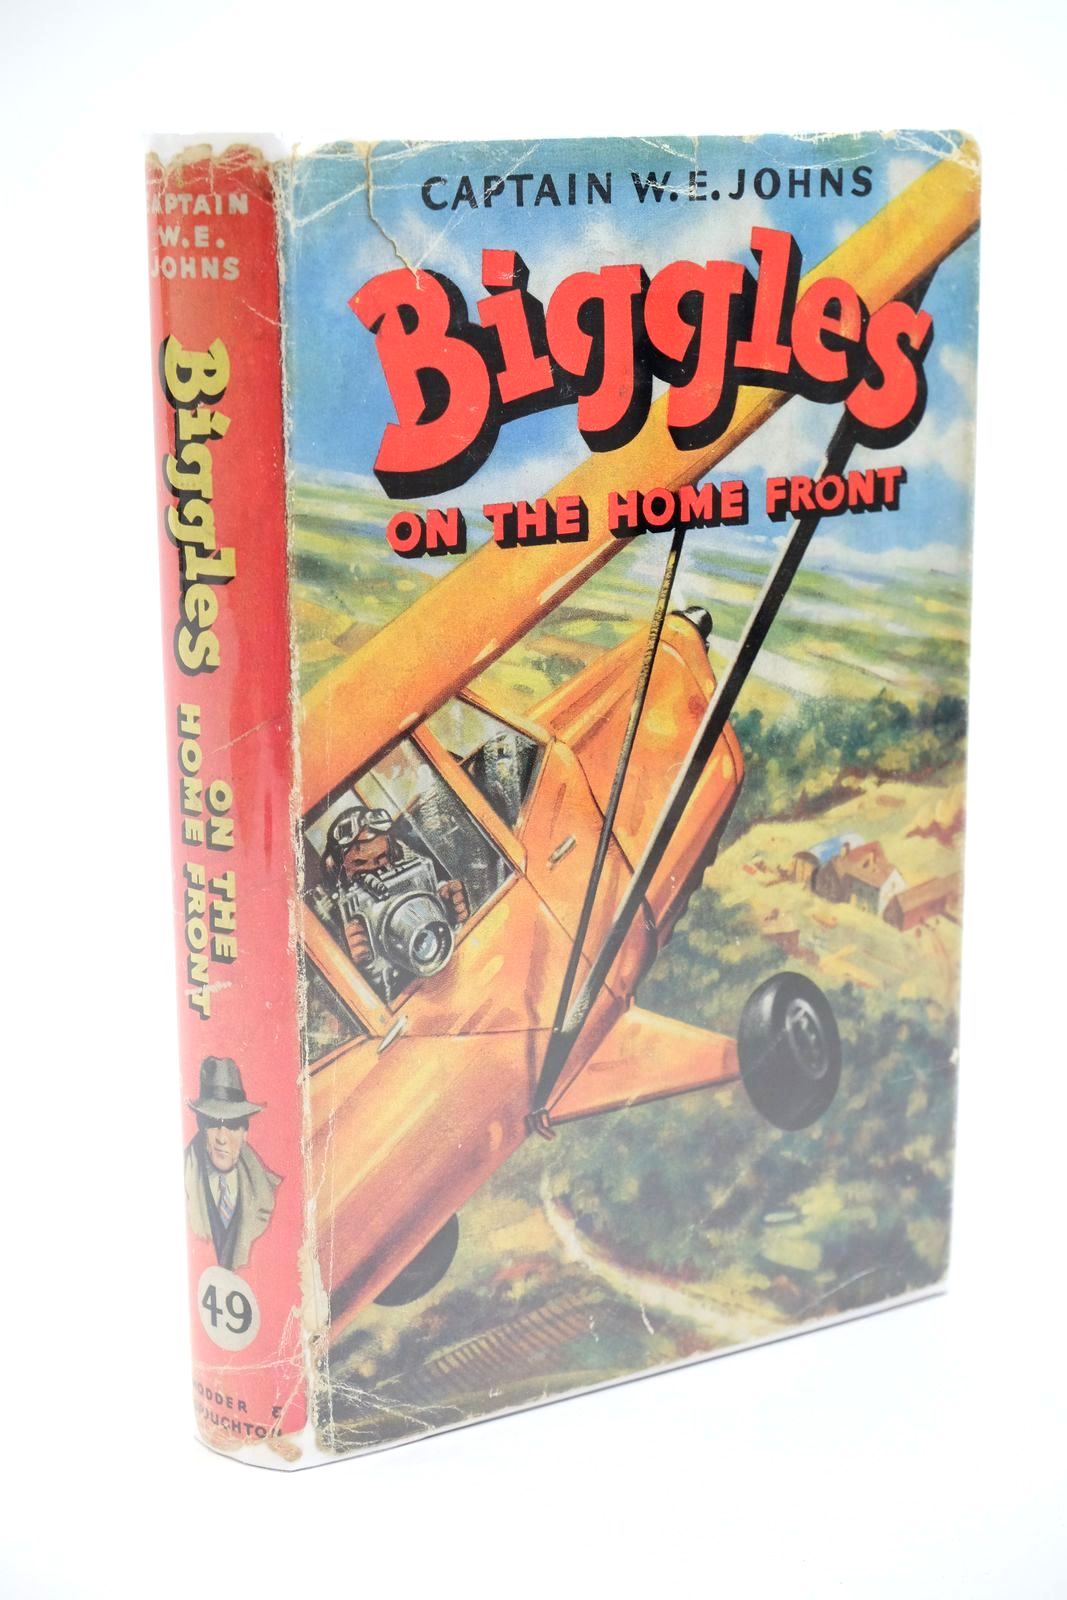 Photo of BIGGLES ON THE HOME FRONT written by Johns, W.E. illustrated by Stead,  published by Hodder & Stoughton (STOCK CODE: 1323255)  for sale by Stella & Rose's Books